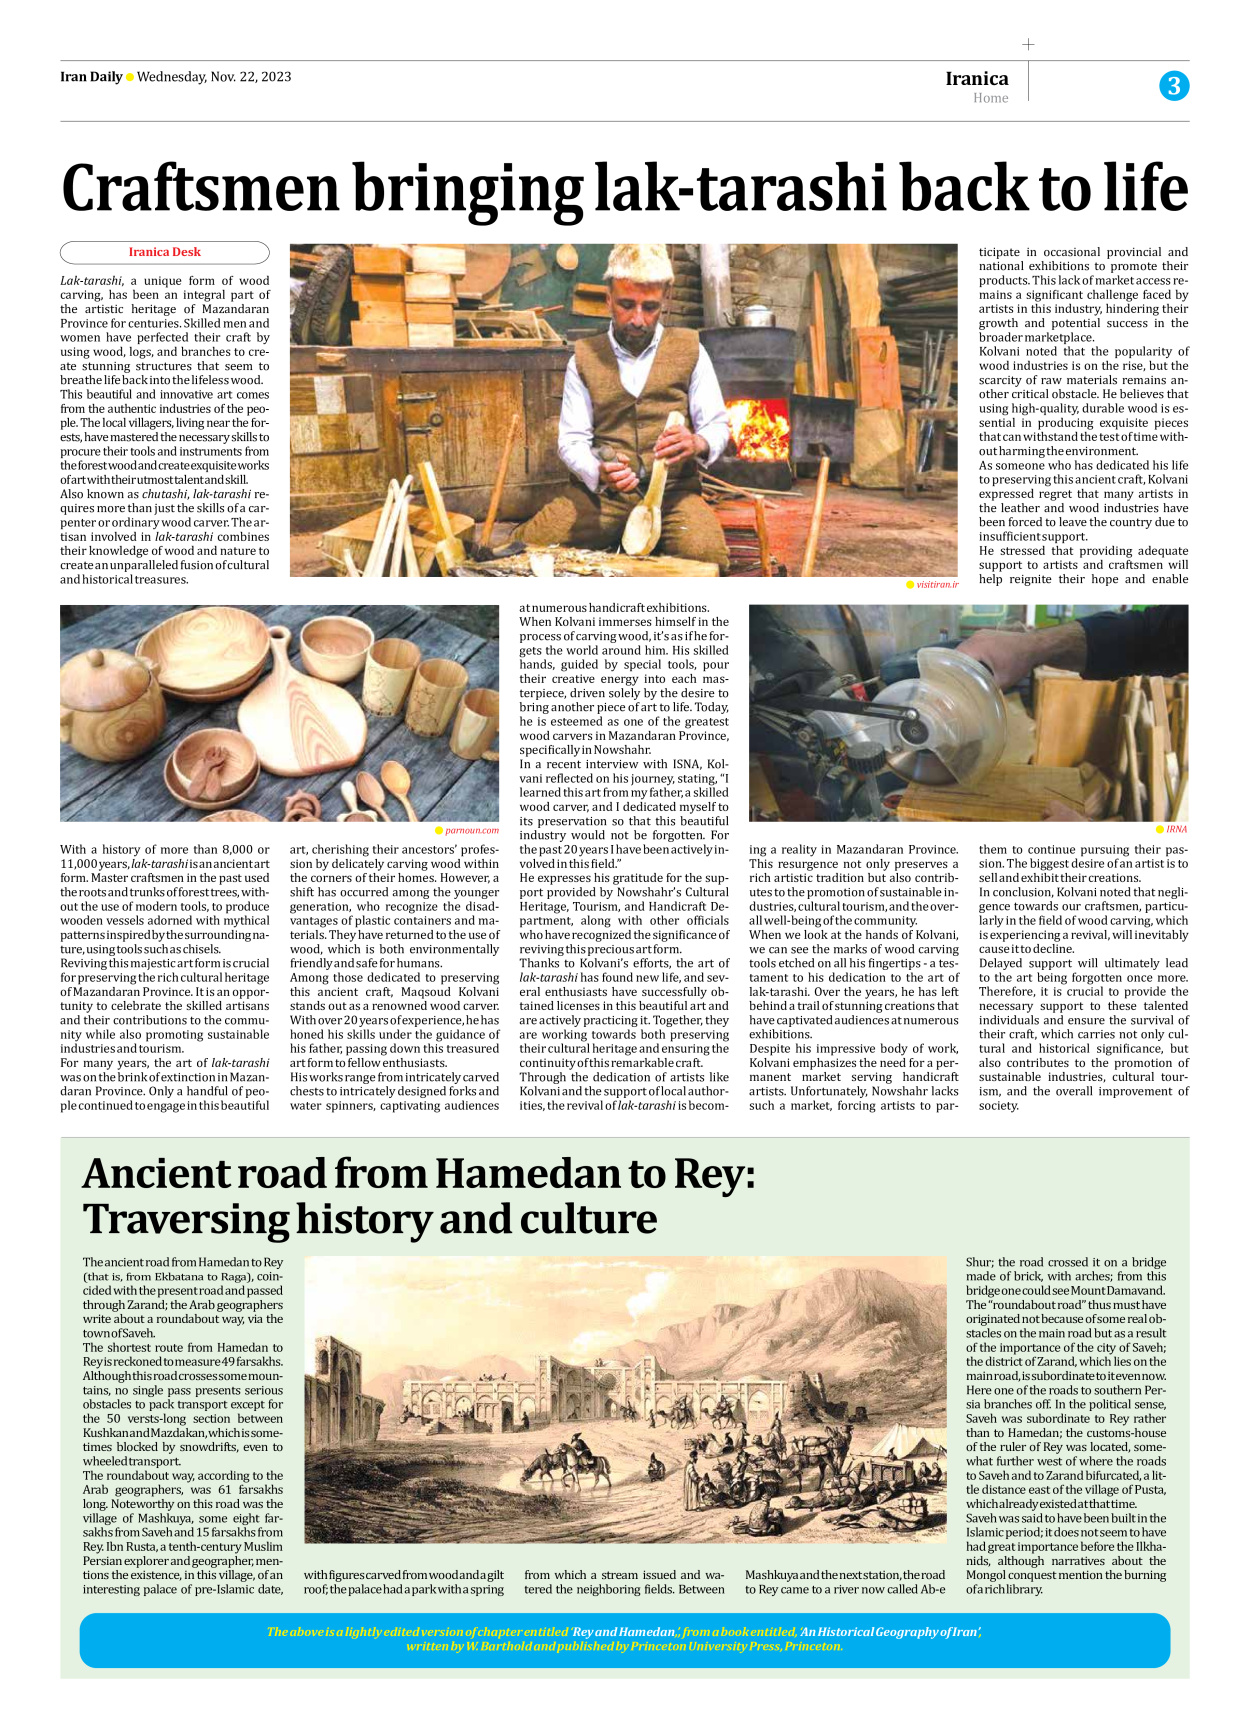 Iran Daily - Number Seven Thousand Four Hundred and Forty One - 22 November 2023 - Page 3